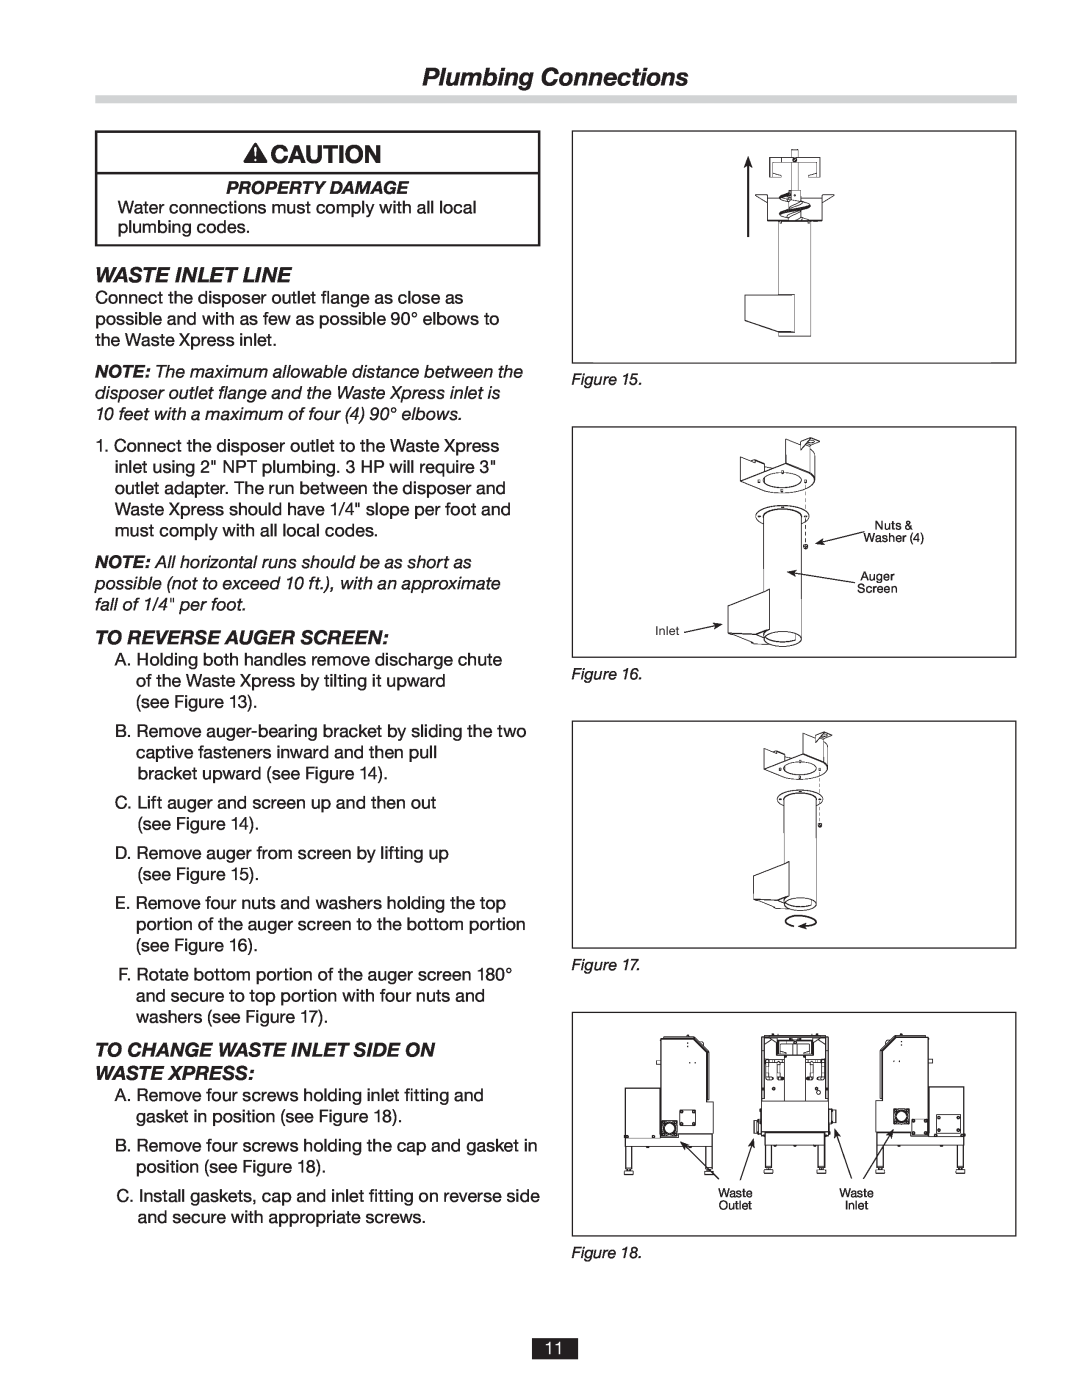 InSinkErator 14481 manual Plumbing Connections, Waste Inlet Line, To Reverse Auger Screen 